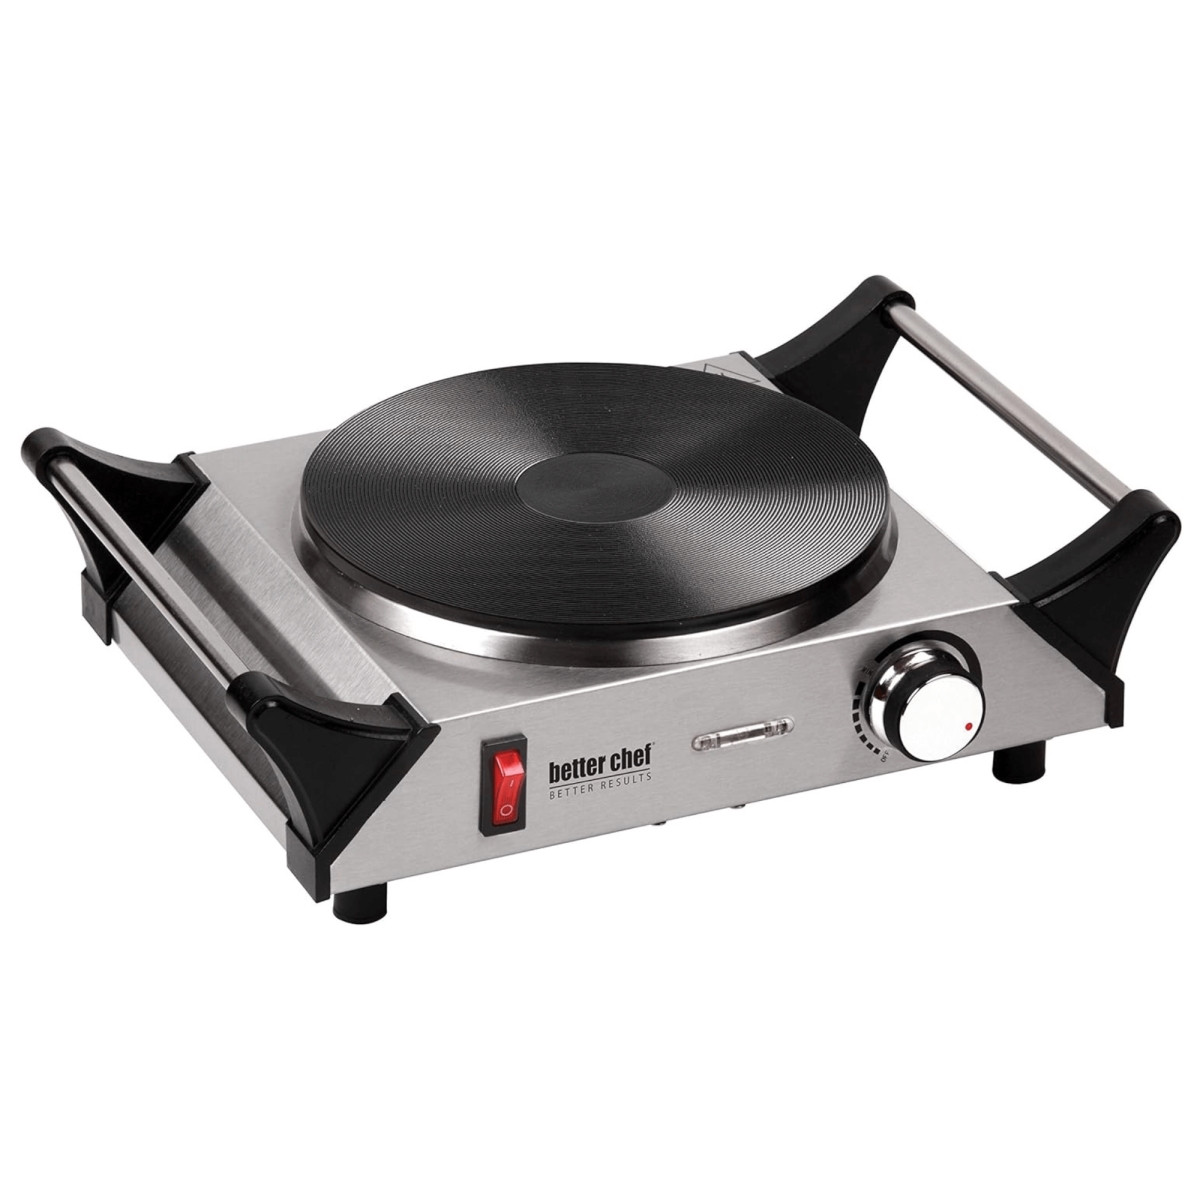 Picture of Better Chef IM-303SB-CP Better Chef Stainless Steel Electric Solid Element Countertop Single Burner